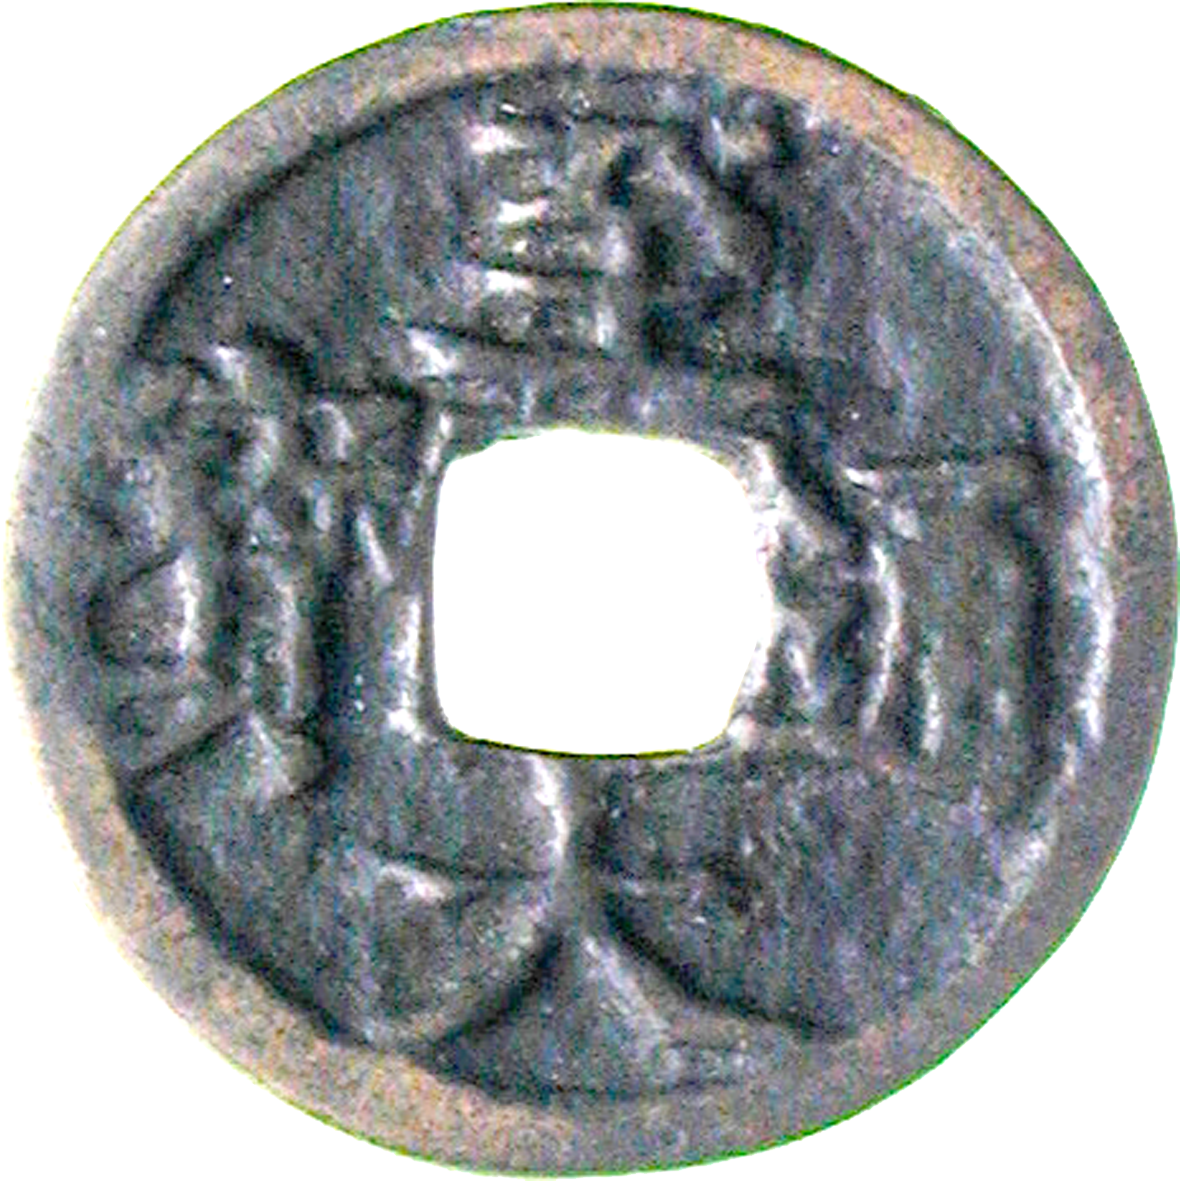 Chinese Empire, Wuzong of Yuan, 1 Ch'ien (obverse)